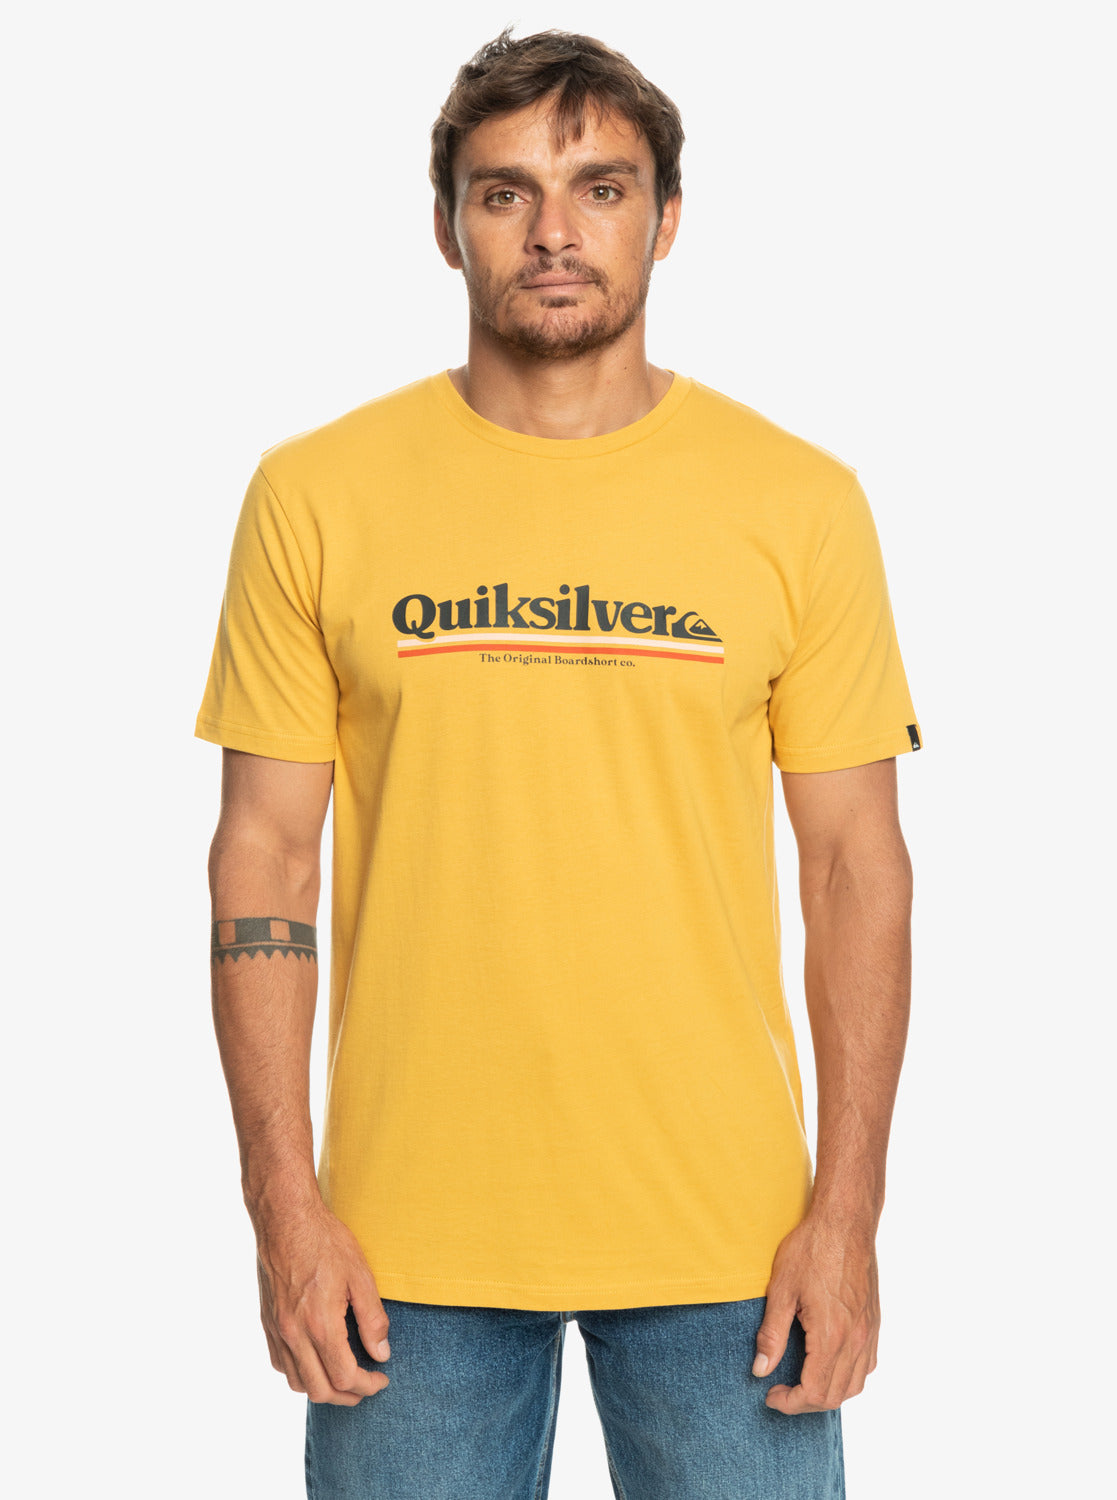 Quiksilver Between The Lines T-Shirt in Bright Gold